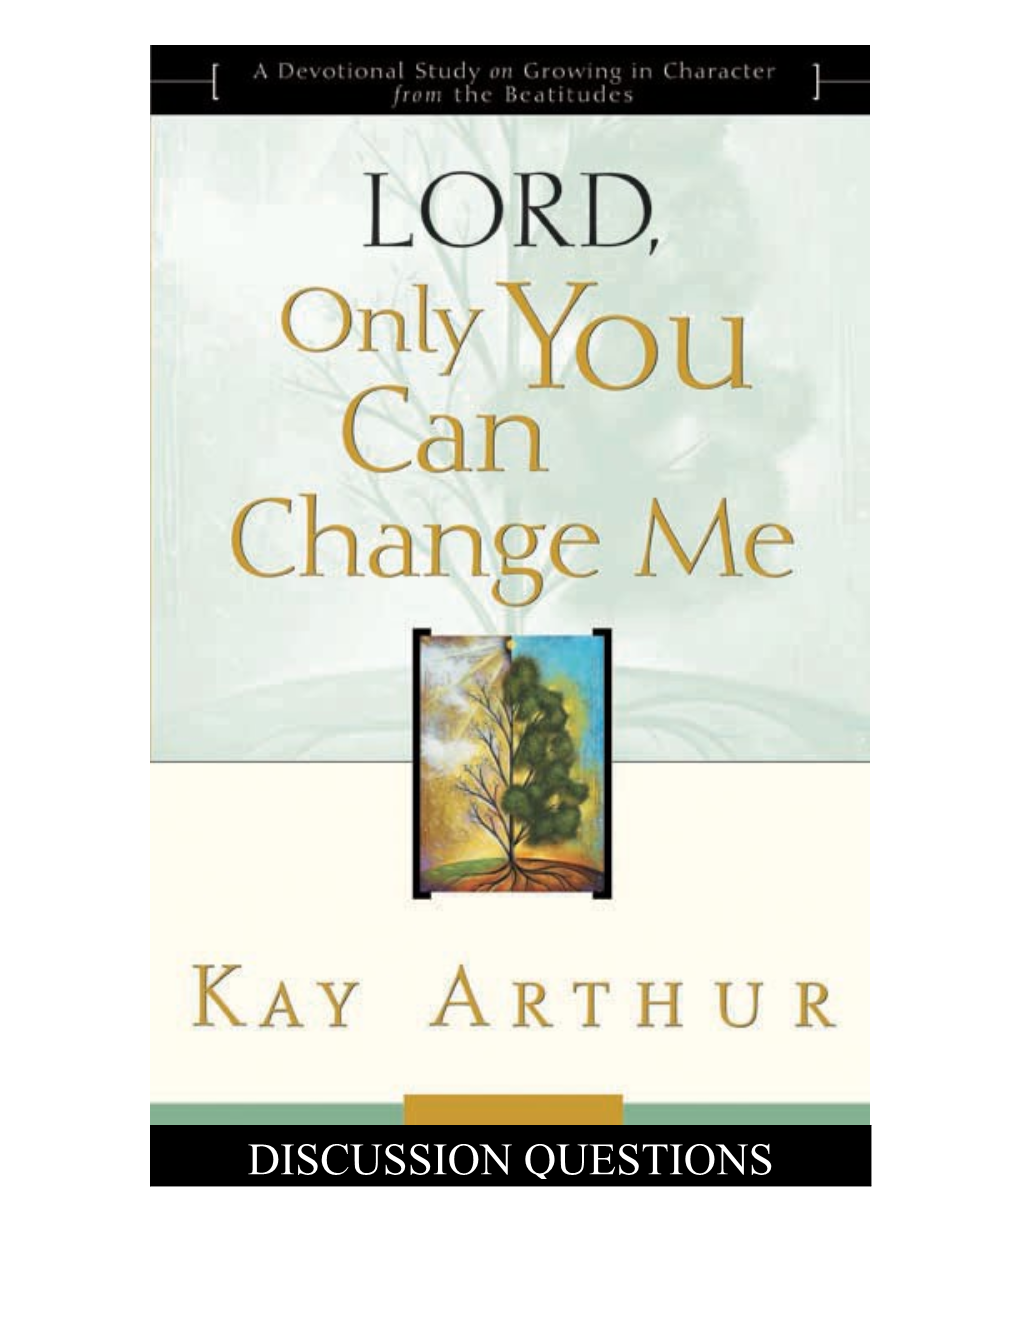 LORD, Only You Can Change Me